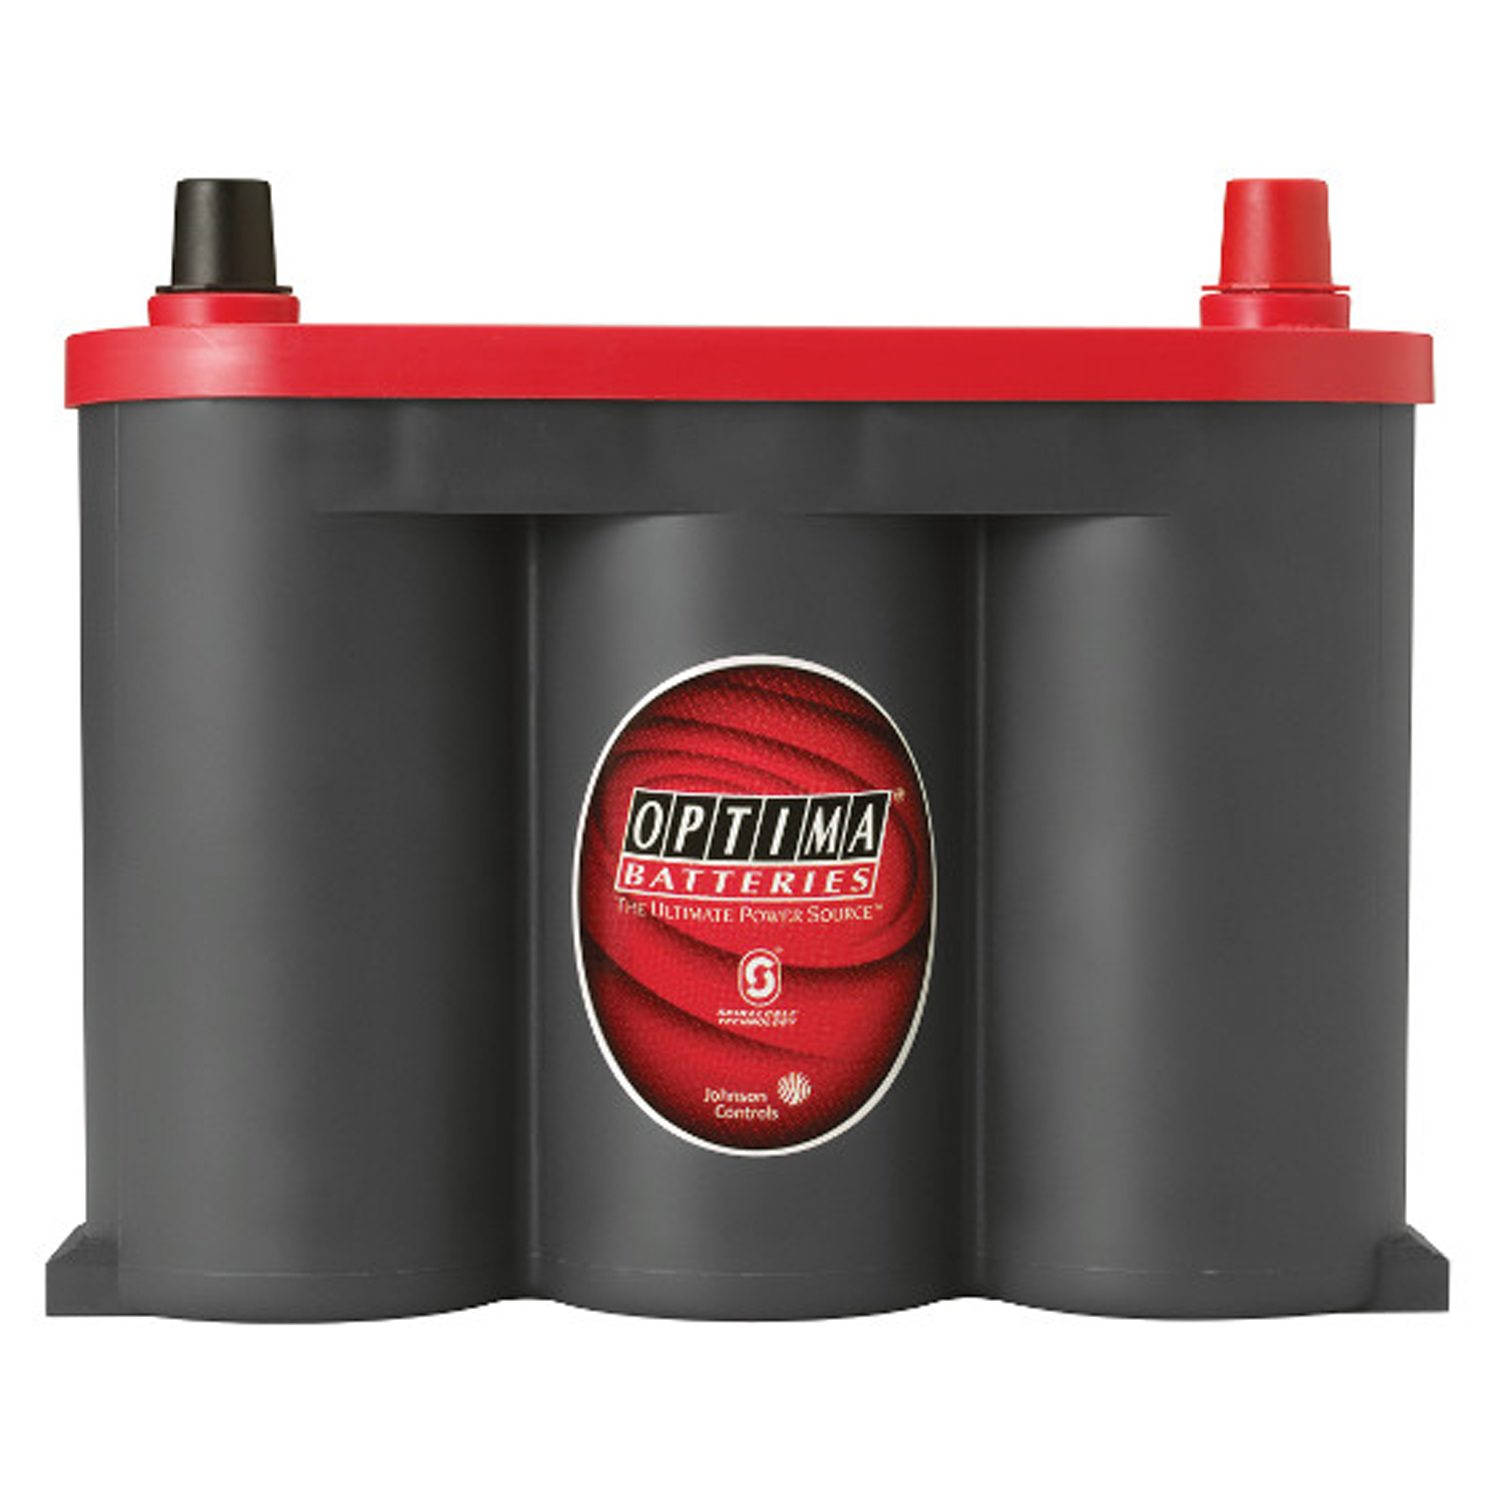 OPTIMA RedTop AGM Spiralcell Automotive Starting Battery, Group Size 6 Volt 800 CCA - image 2 of 3